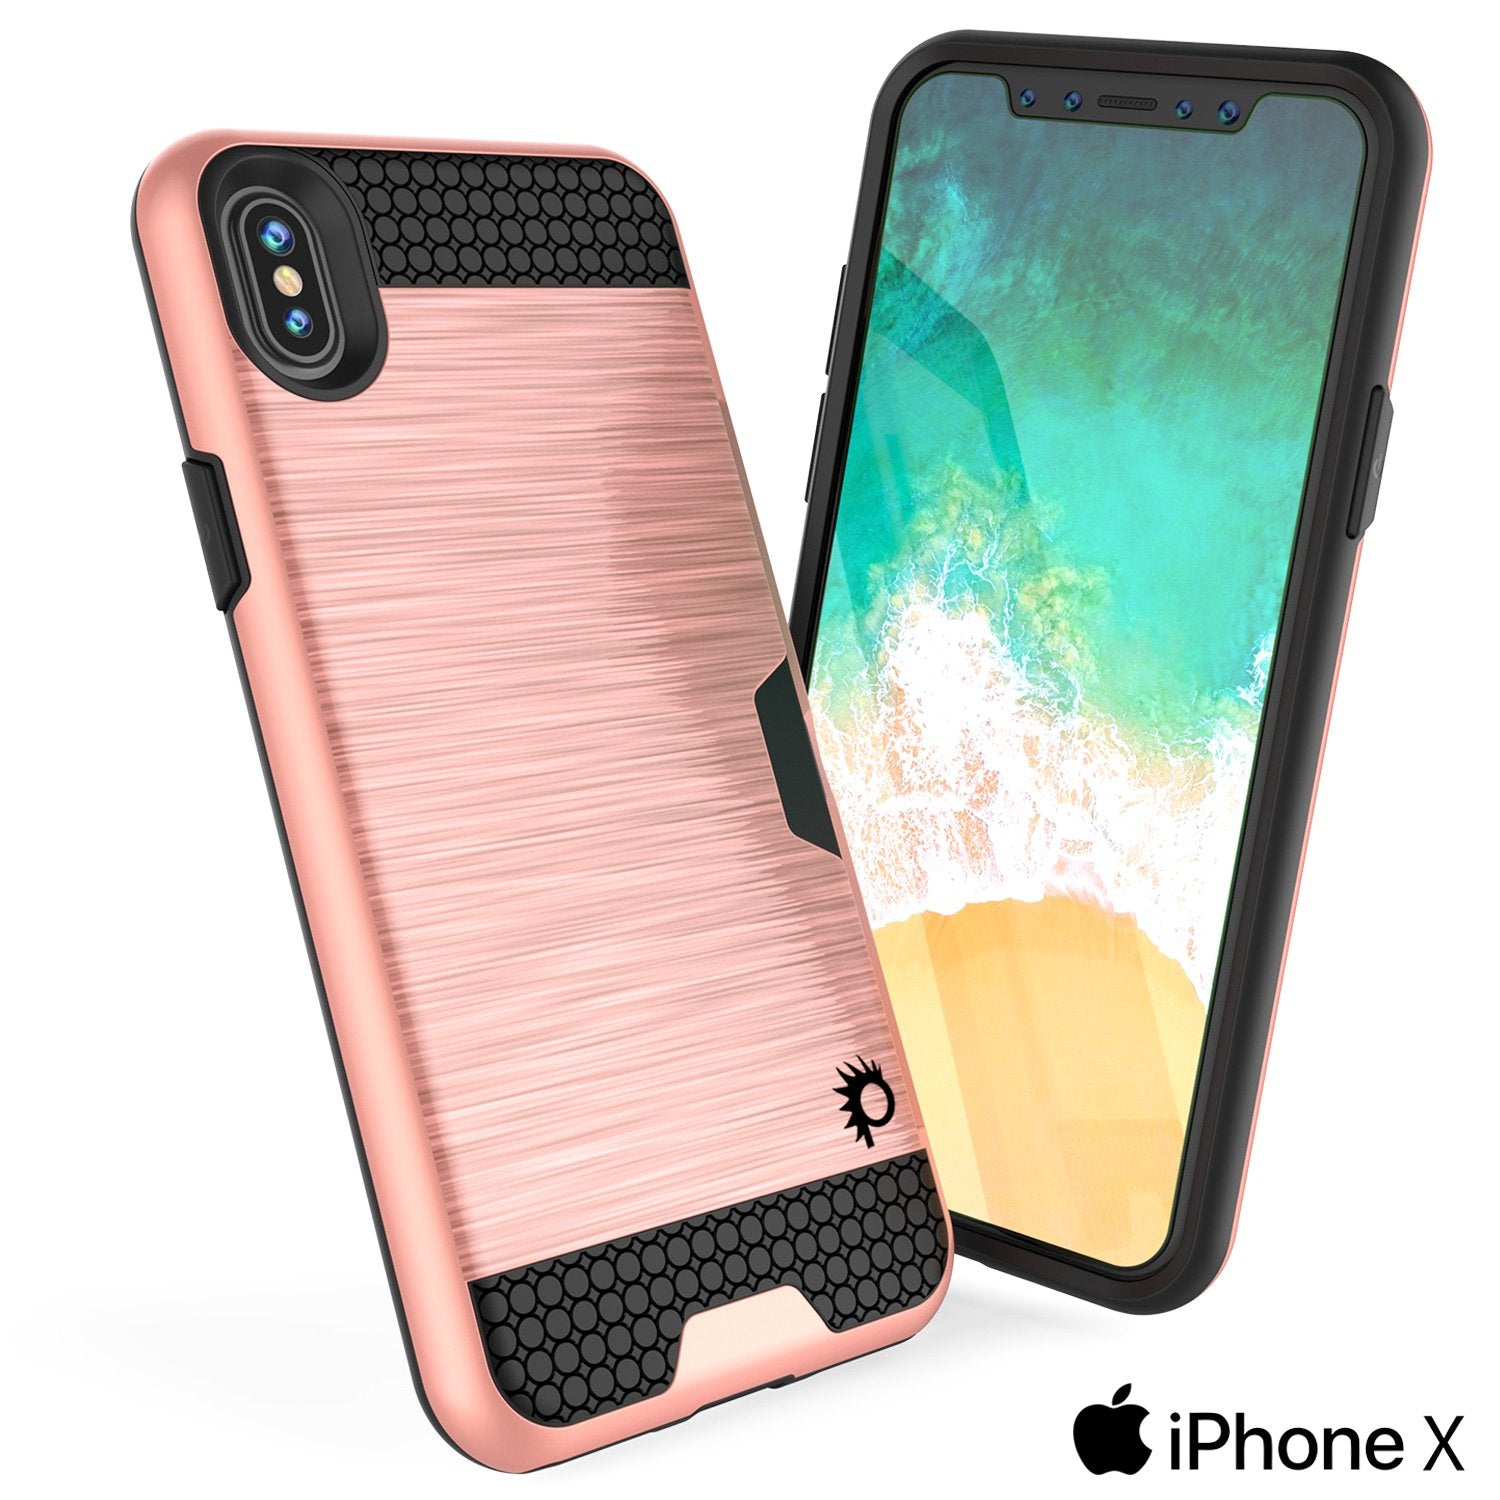 iPhone X Case, PUNKcase [SLOT Series] Slim Fit Dual-Layer Armor Cover & Tempered Glass PUNKSHIELD Screen Protector for Apple iPhone X [Rose Gold] - PunkCase NZ